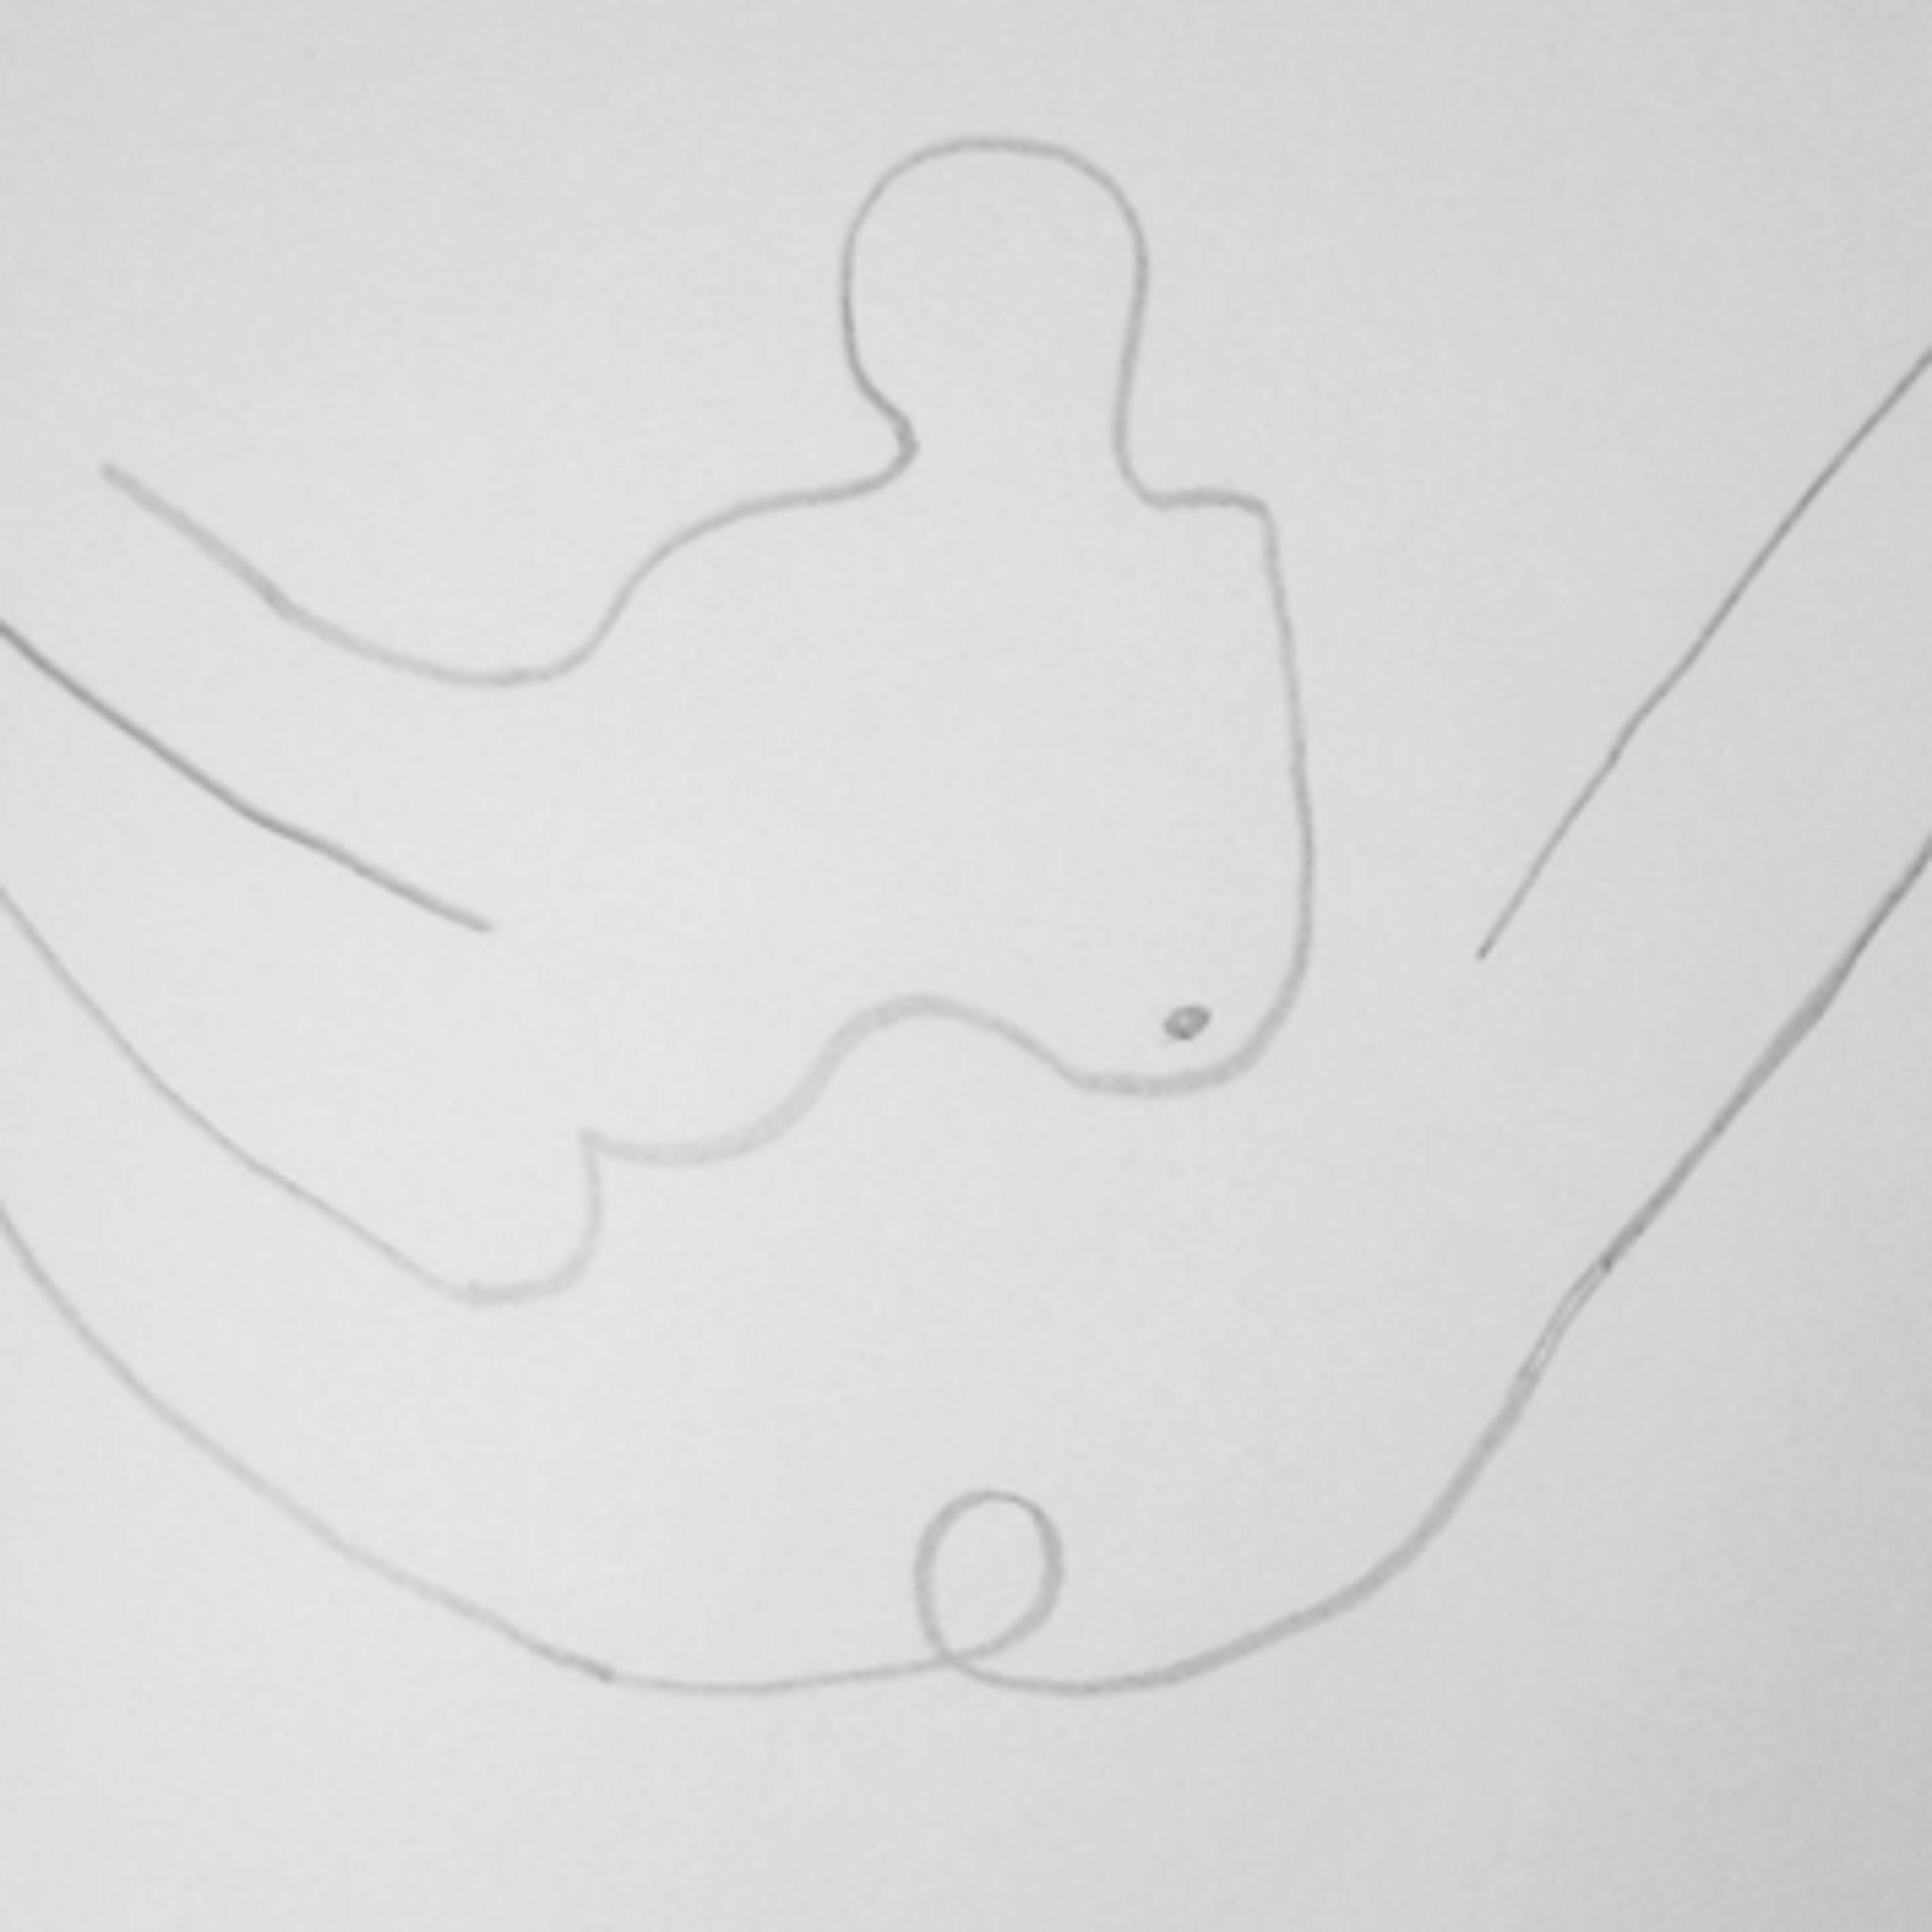 A line drawing of a woman's figure